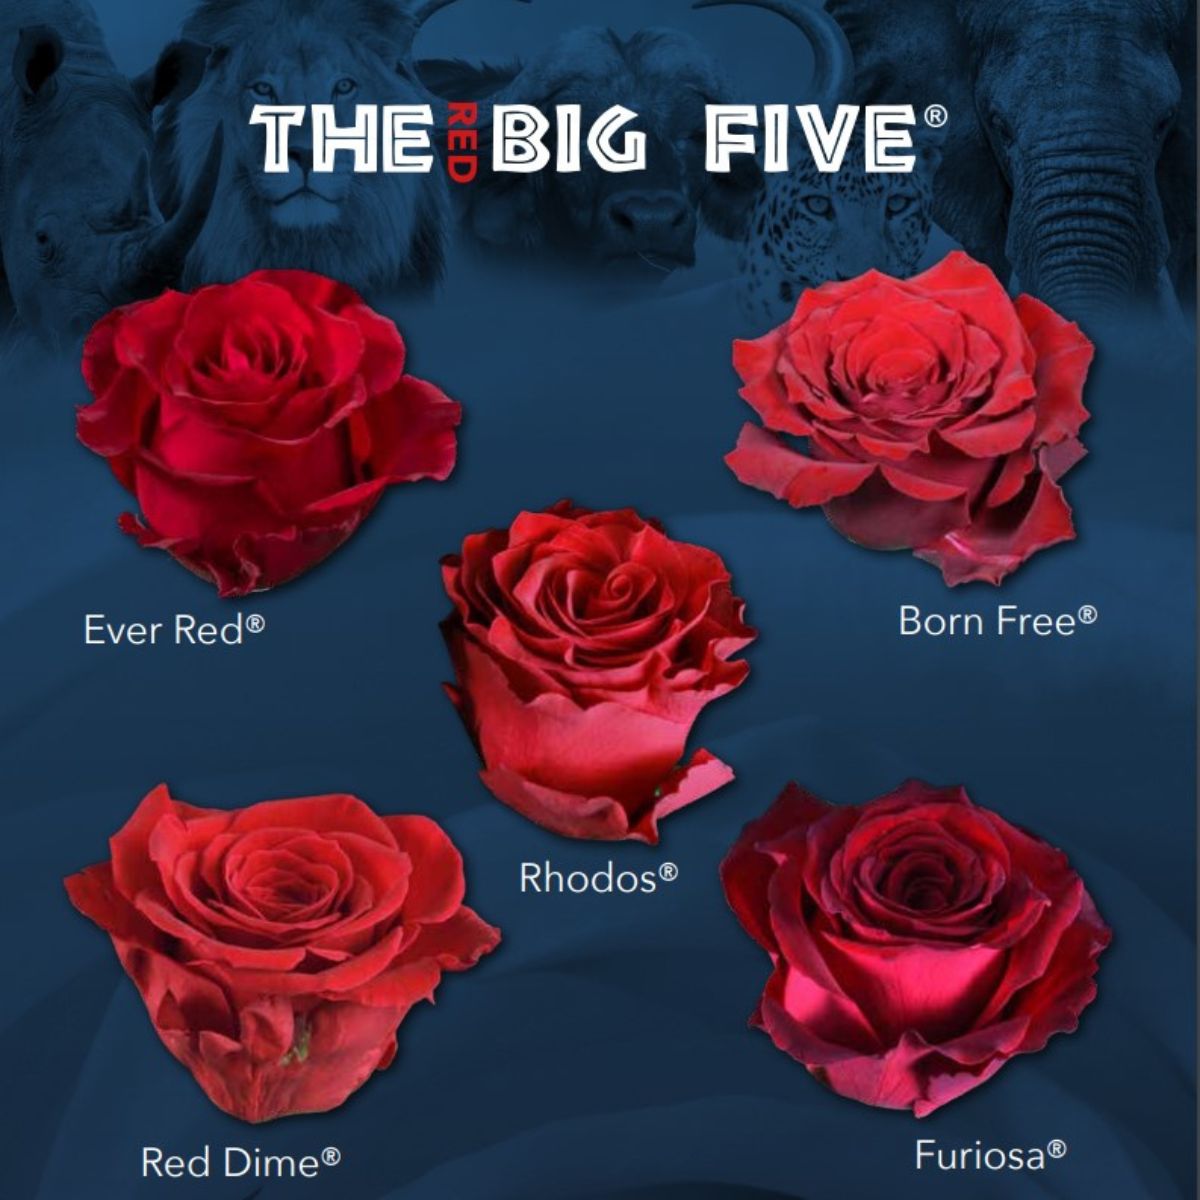 The red big five complete